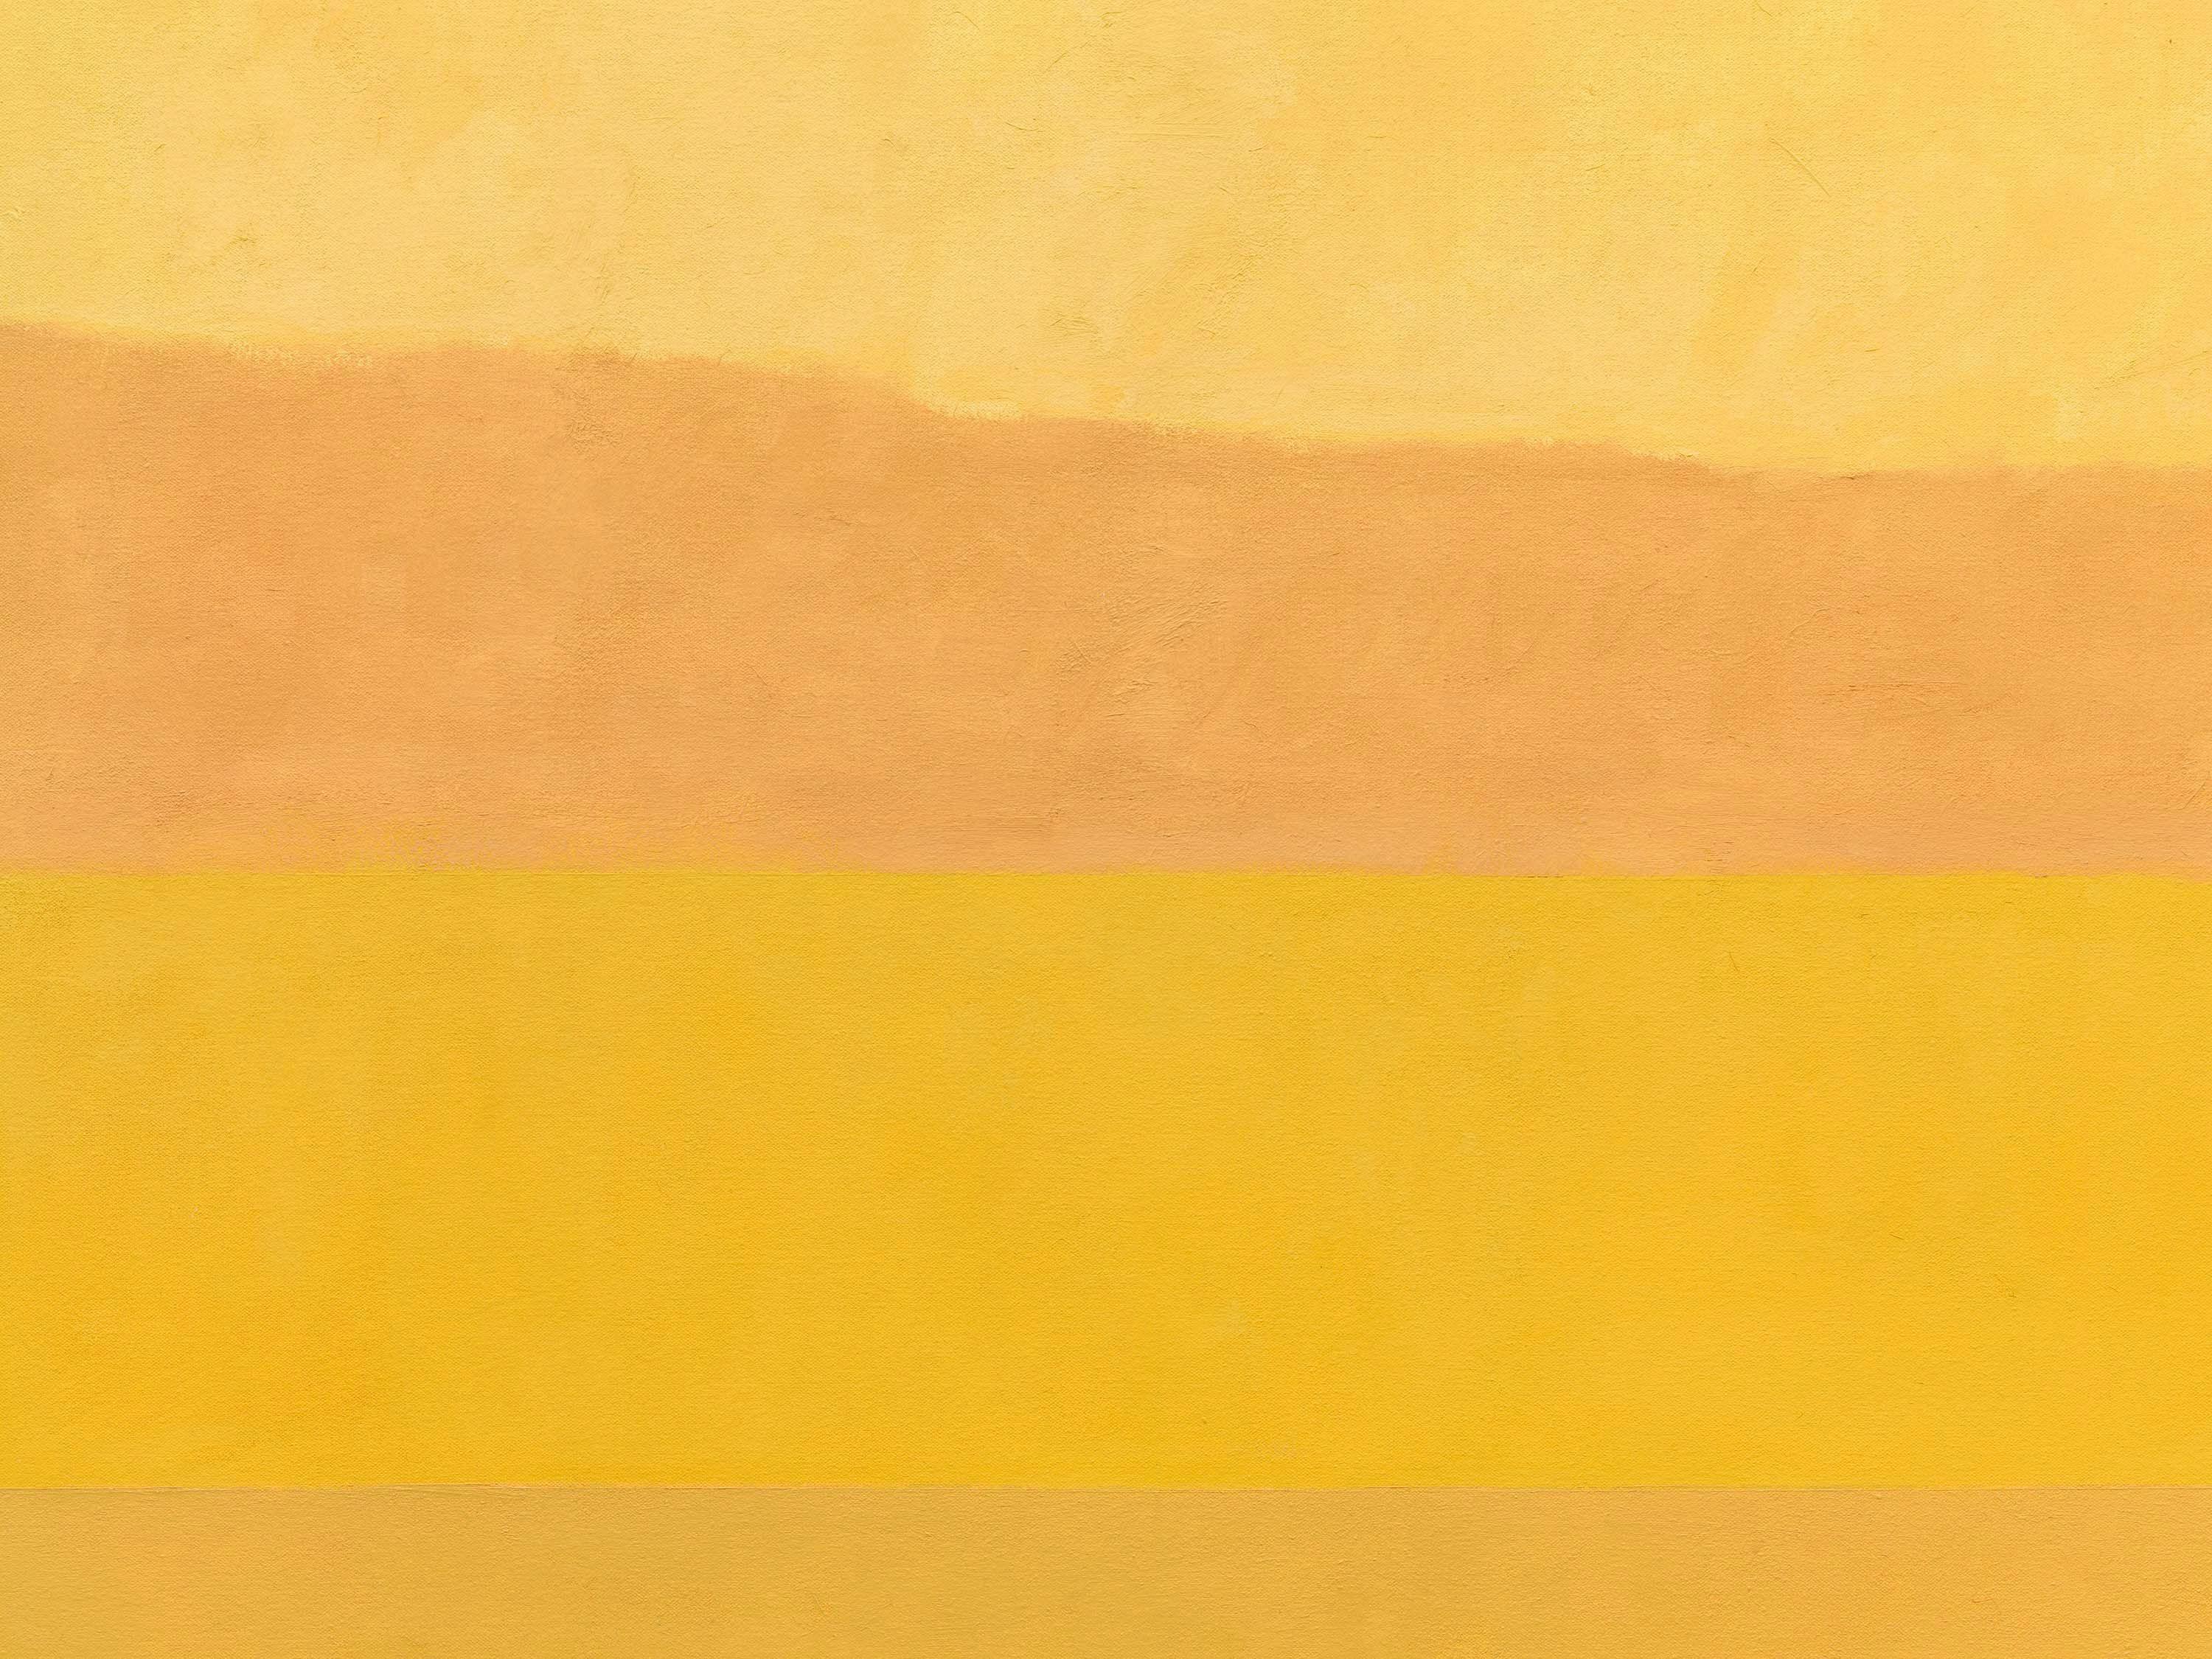 A detail from a painting by Merrill Wagner, titled ﻿Ucross 2002: 5 Brands of Naples Yellow, dated 2004.